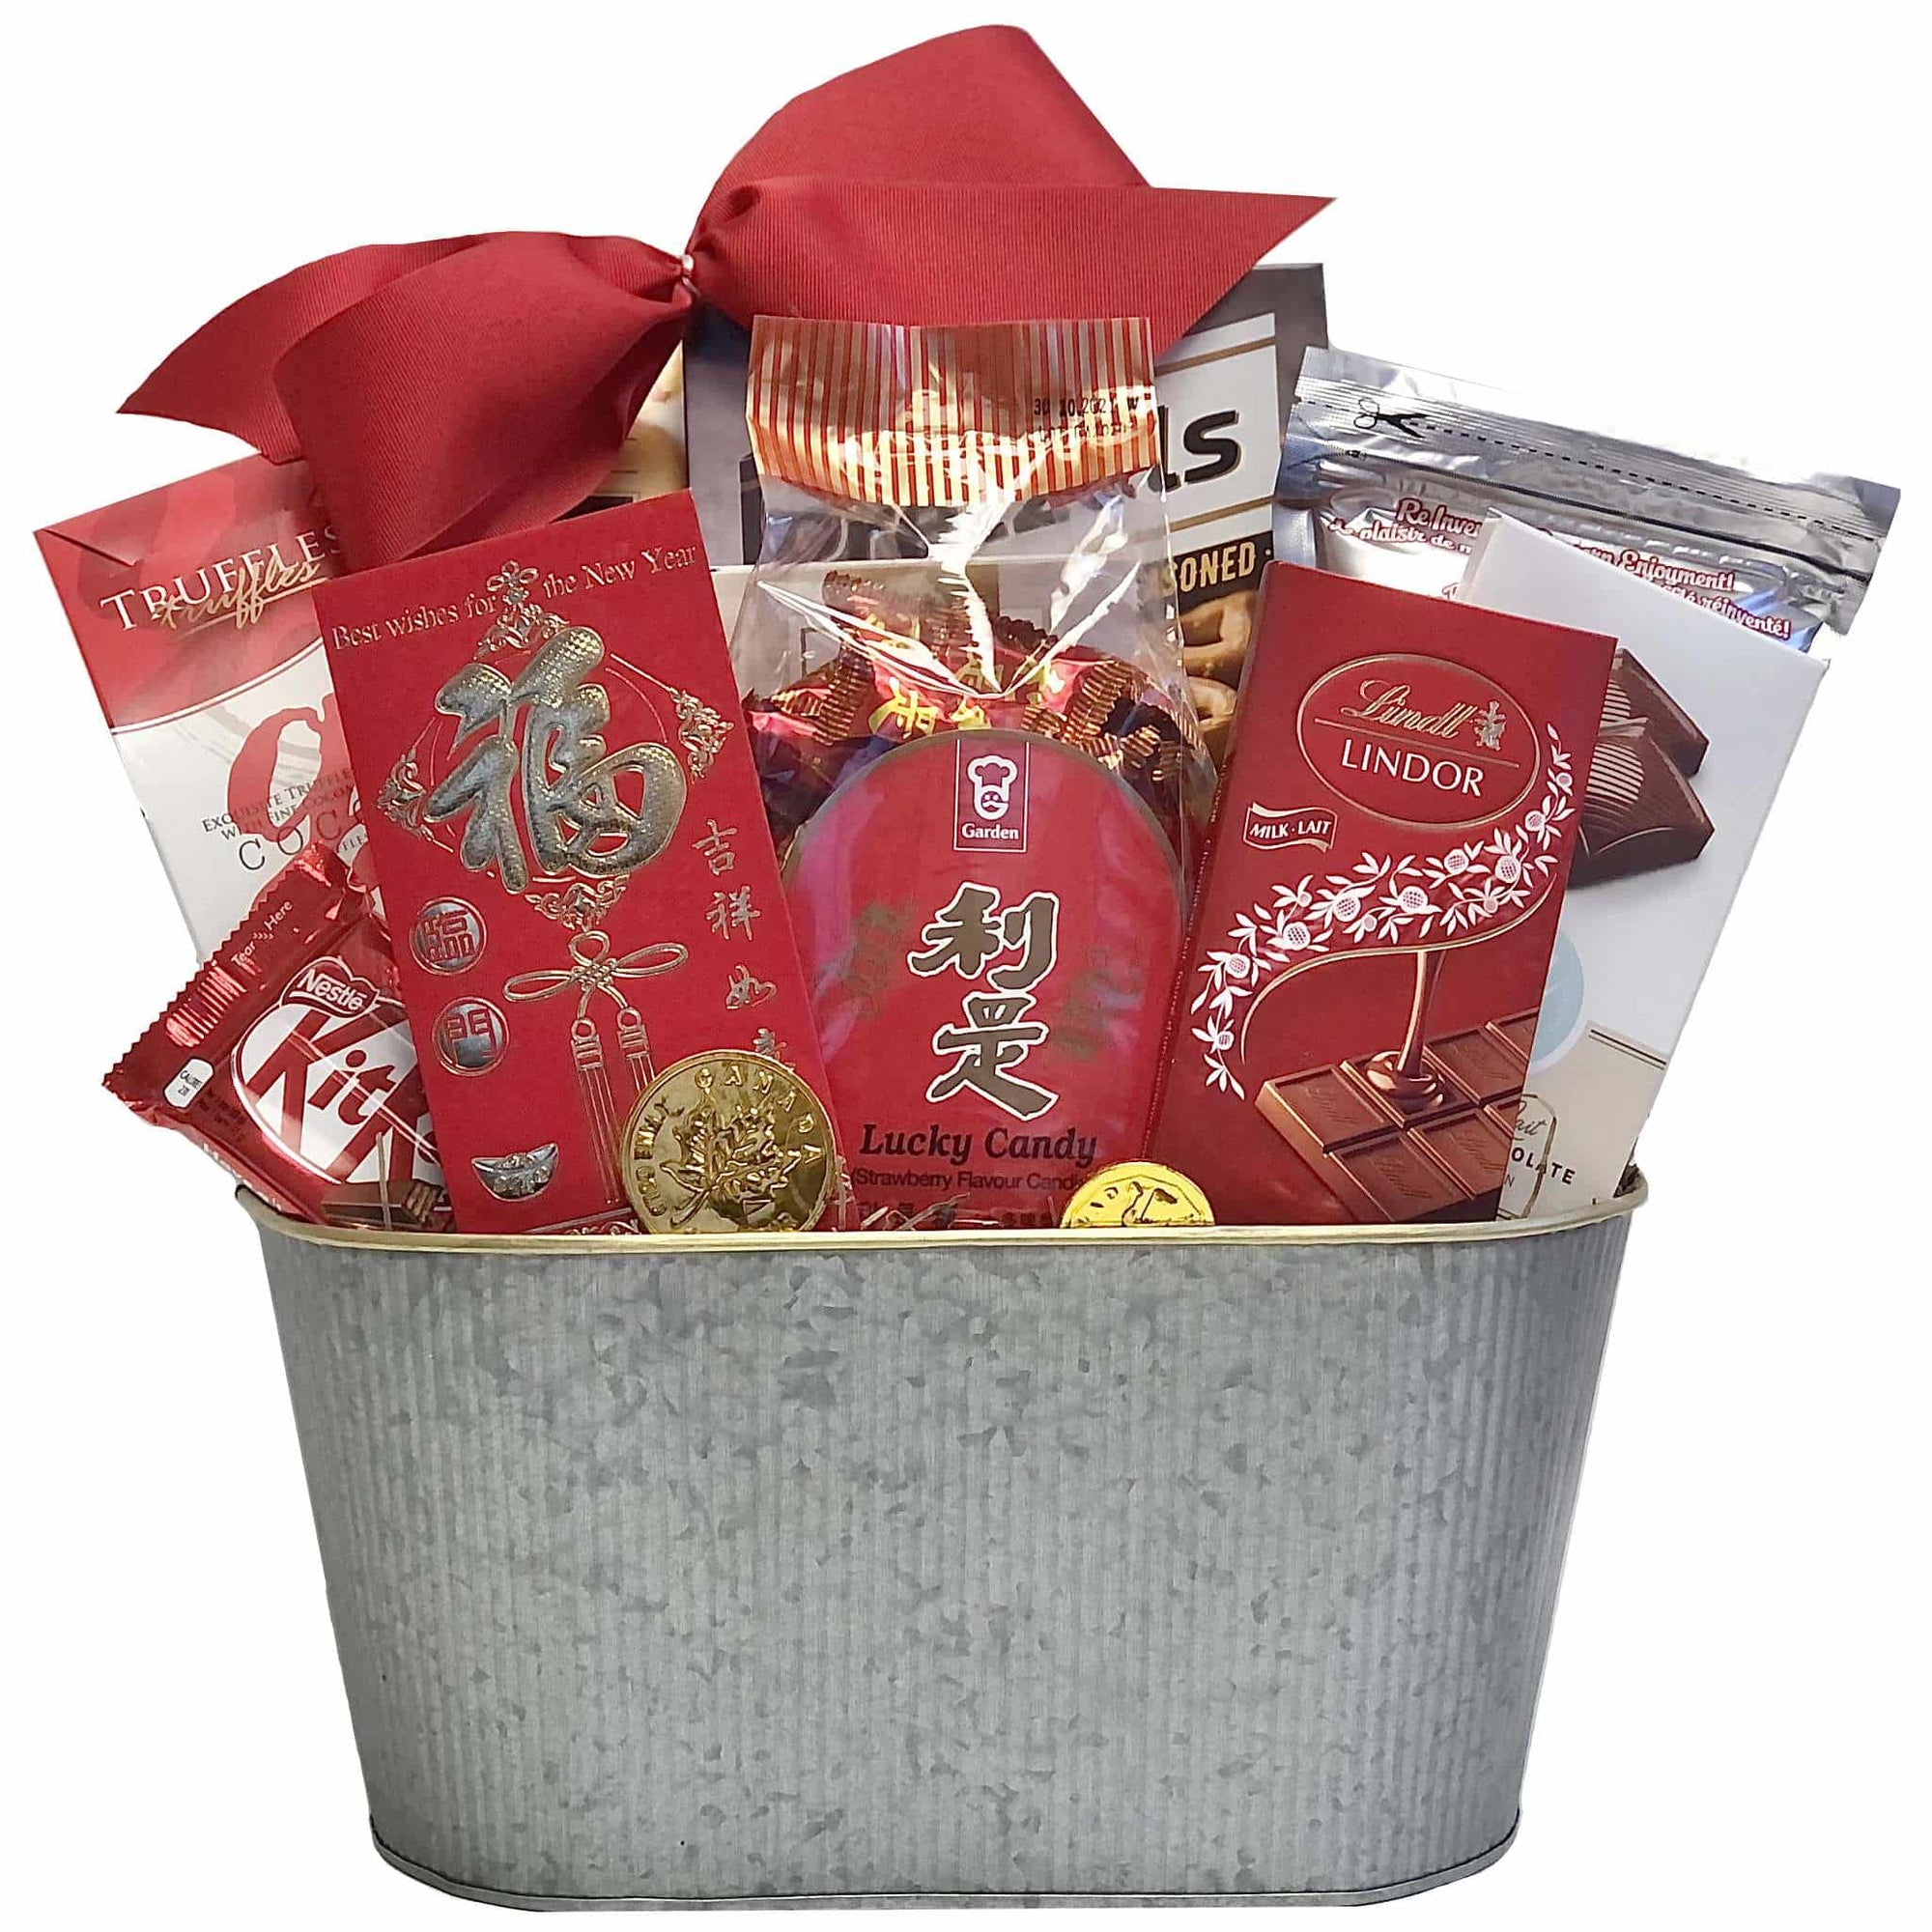 Lunar New Year gift basket delivery